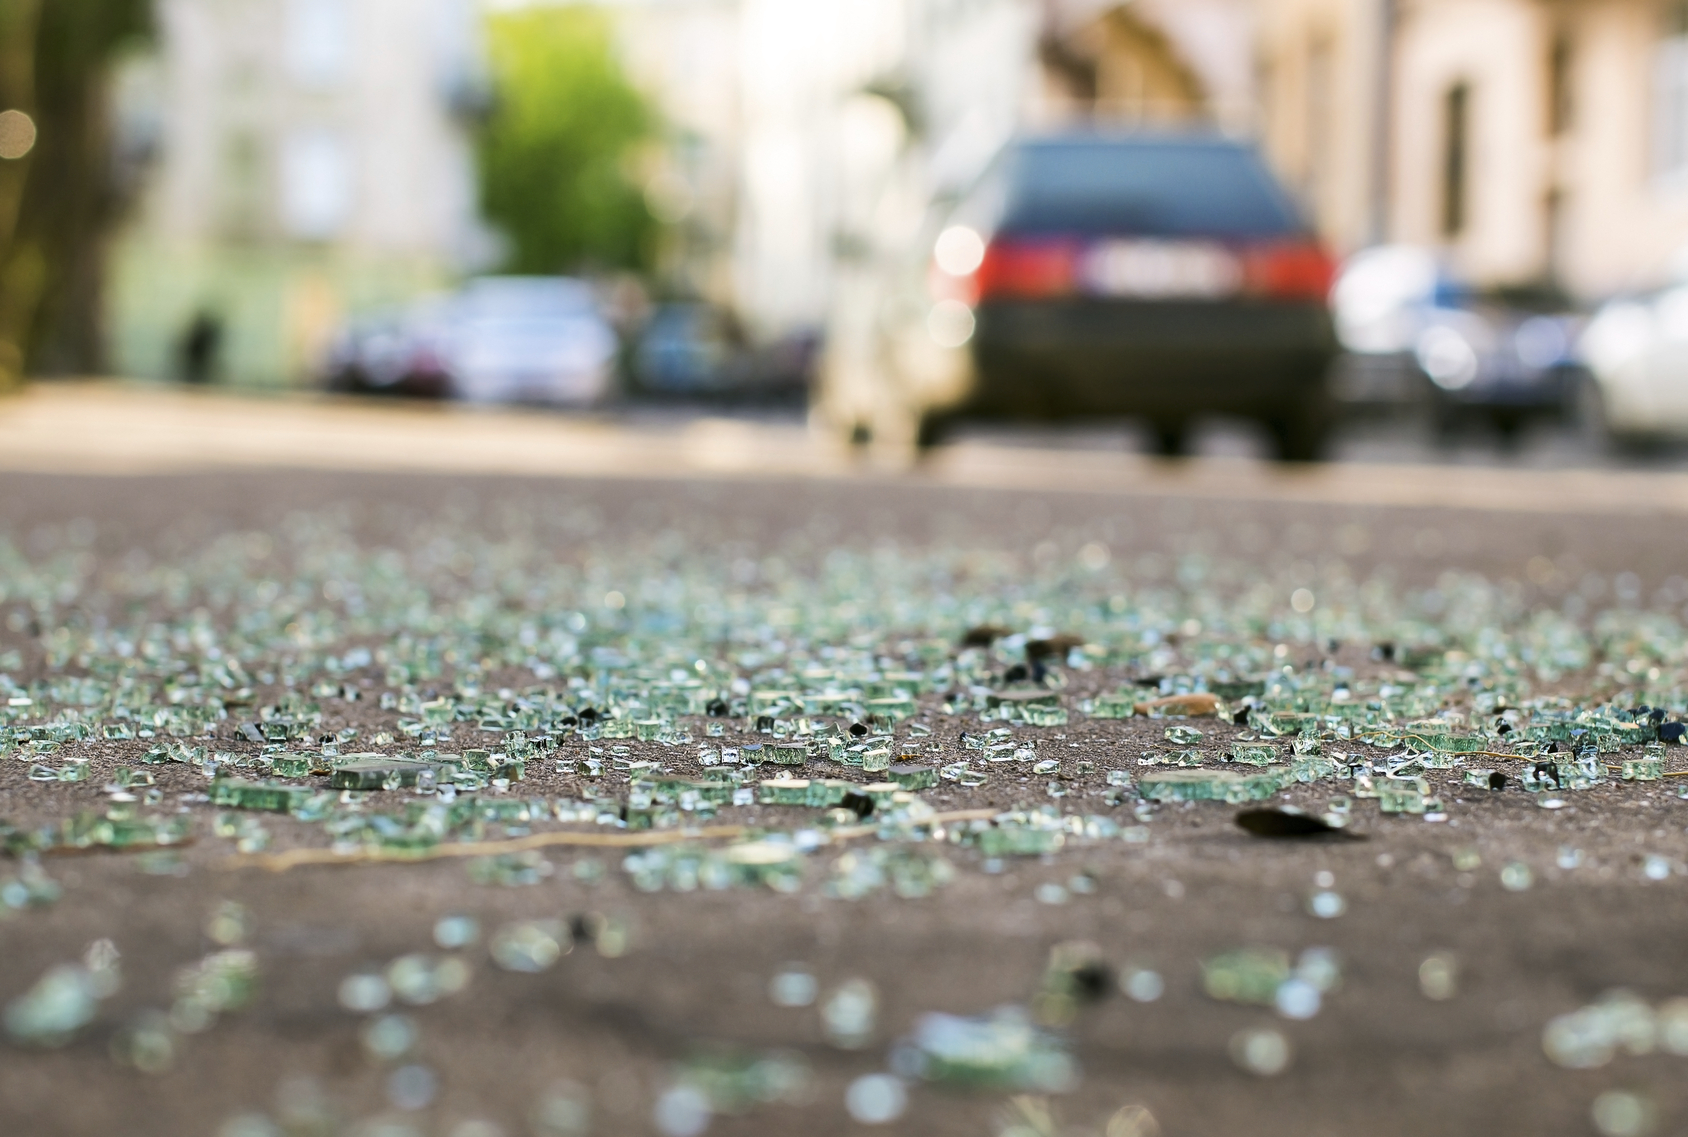 I Was Hit By a Driver Who Does Not Have Insurance in Baltimore – What Can I Do?